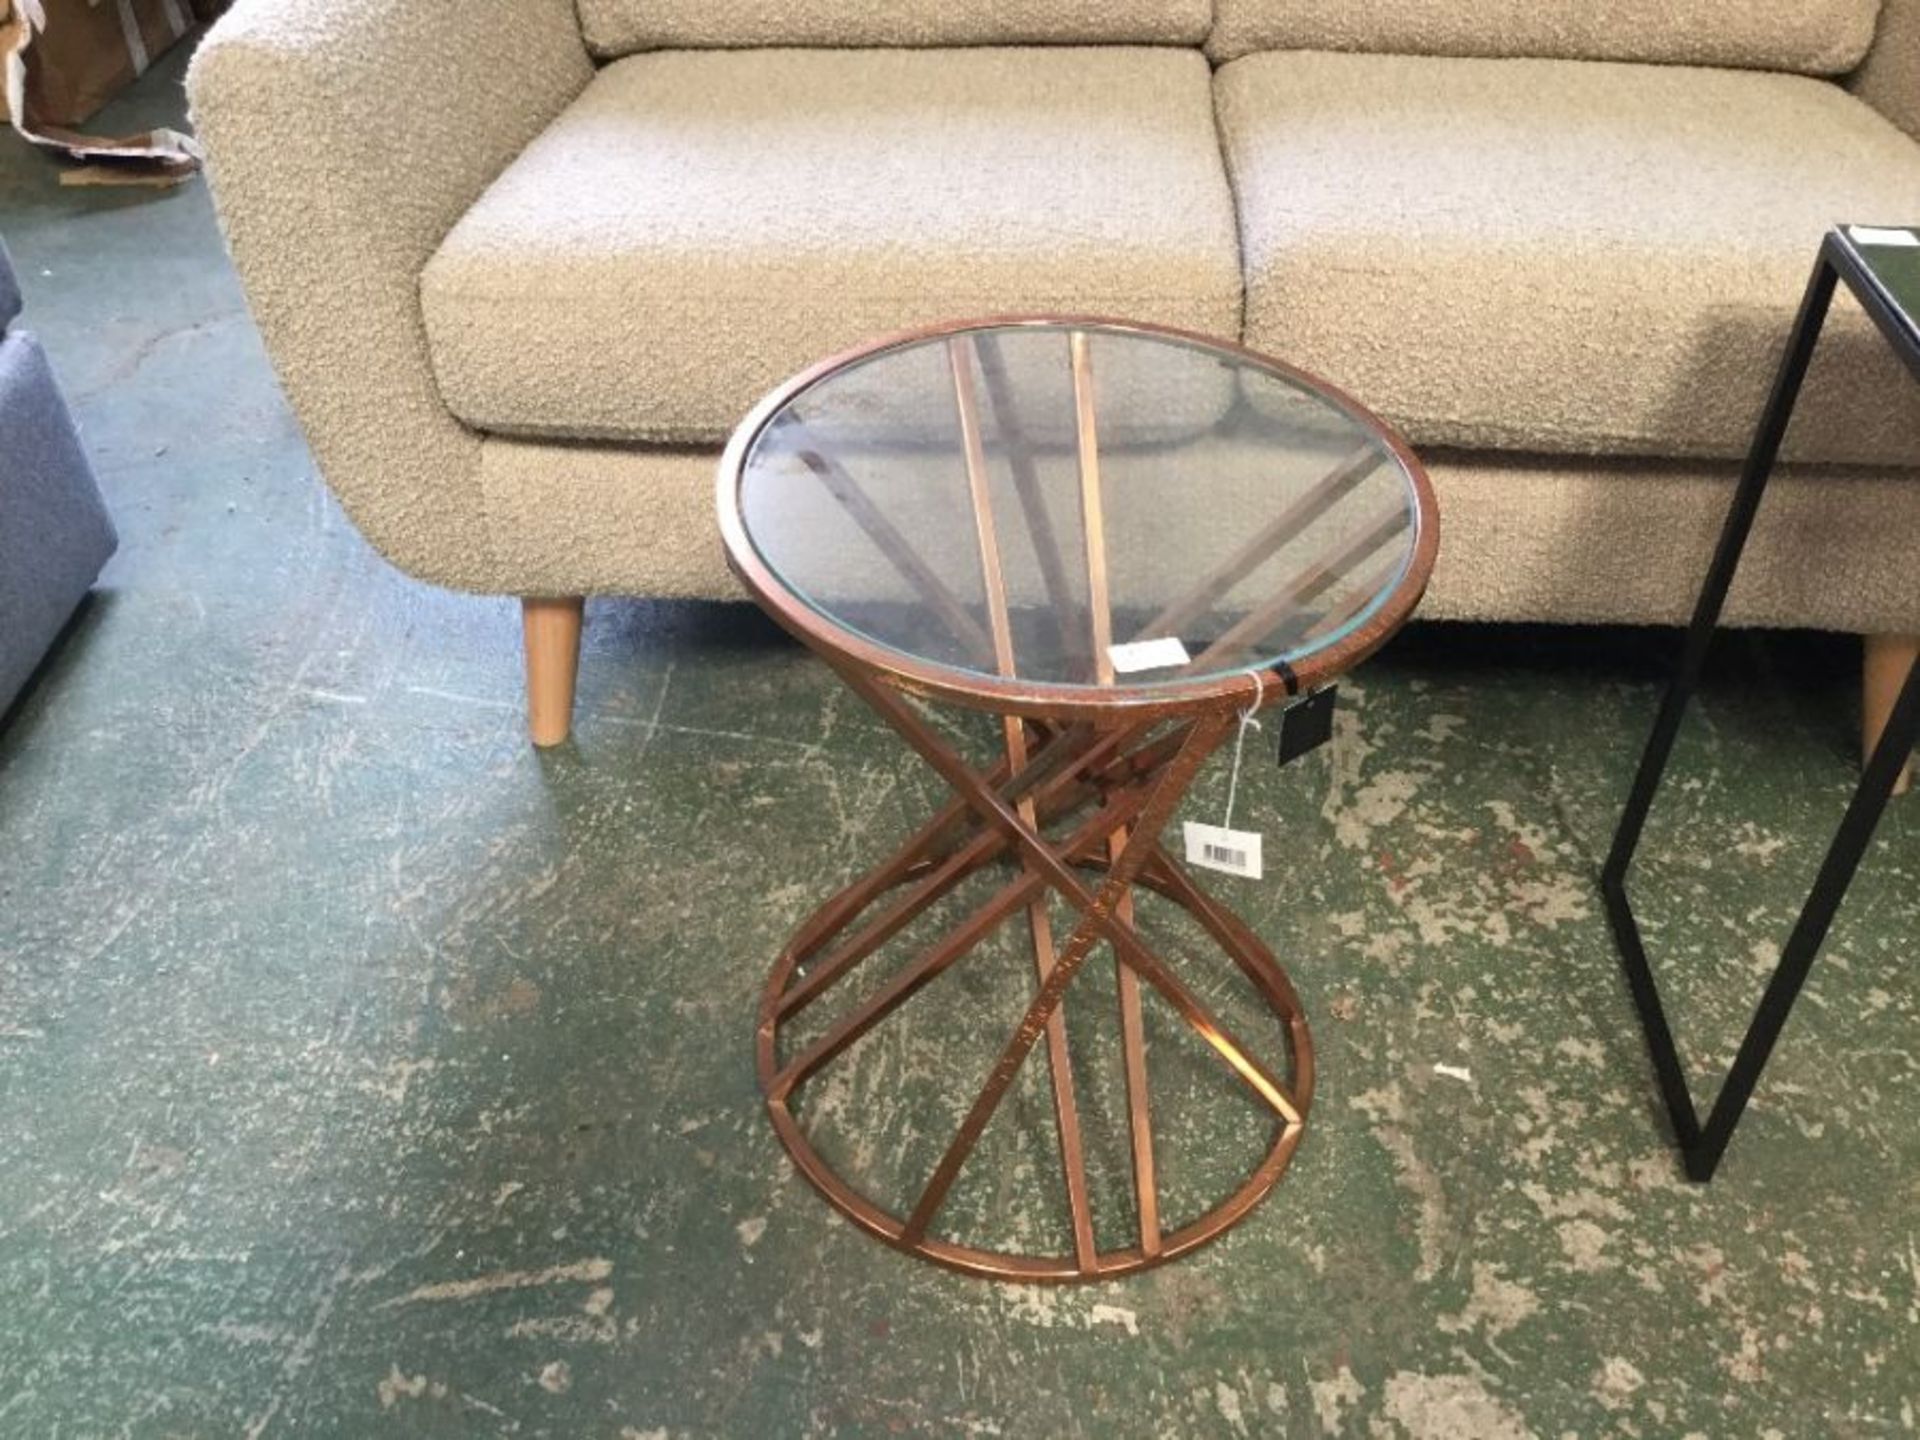 Copper Twist Round Side Table With Glass Top - RRP £269.95 (33 - 700016)(PAINT DEFECT)